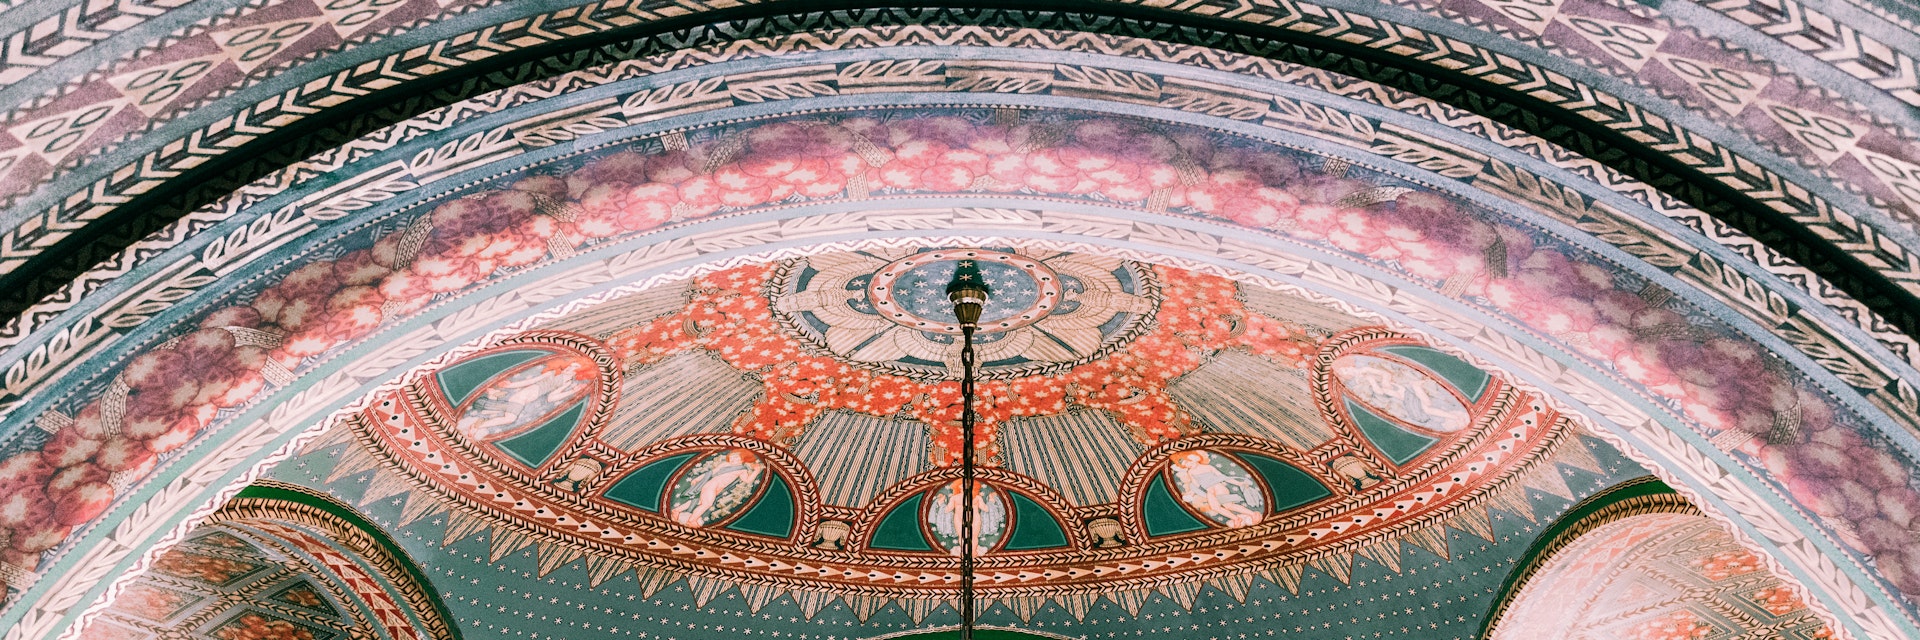 A ceiling painting in the Fisher Building in Detroit.